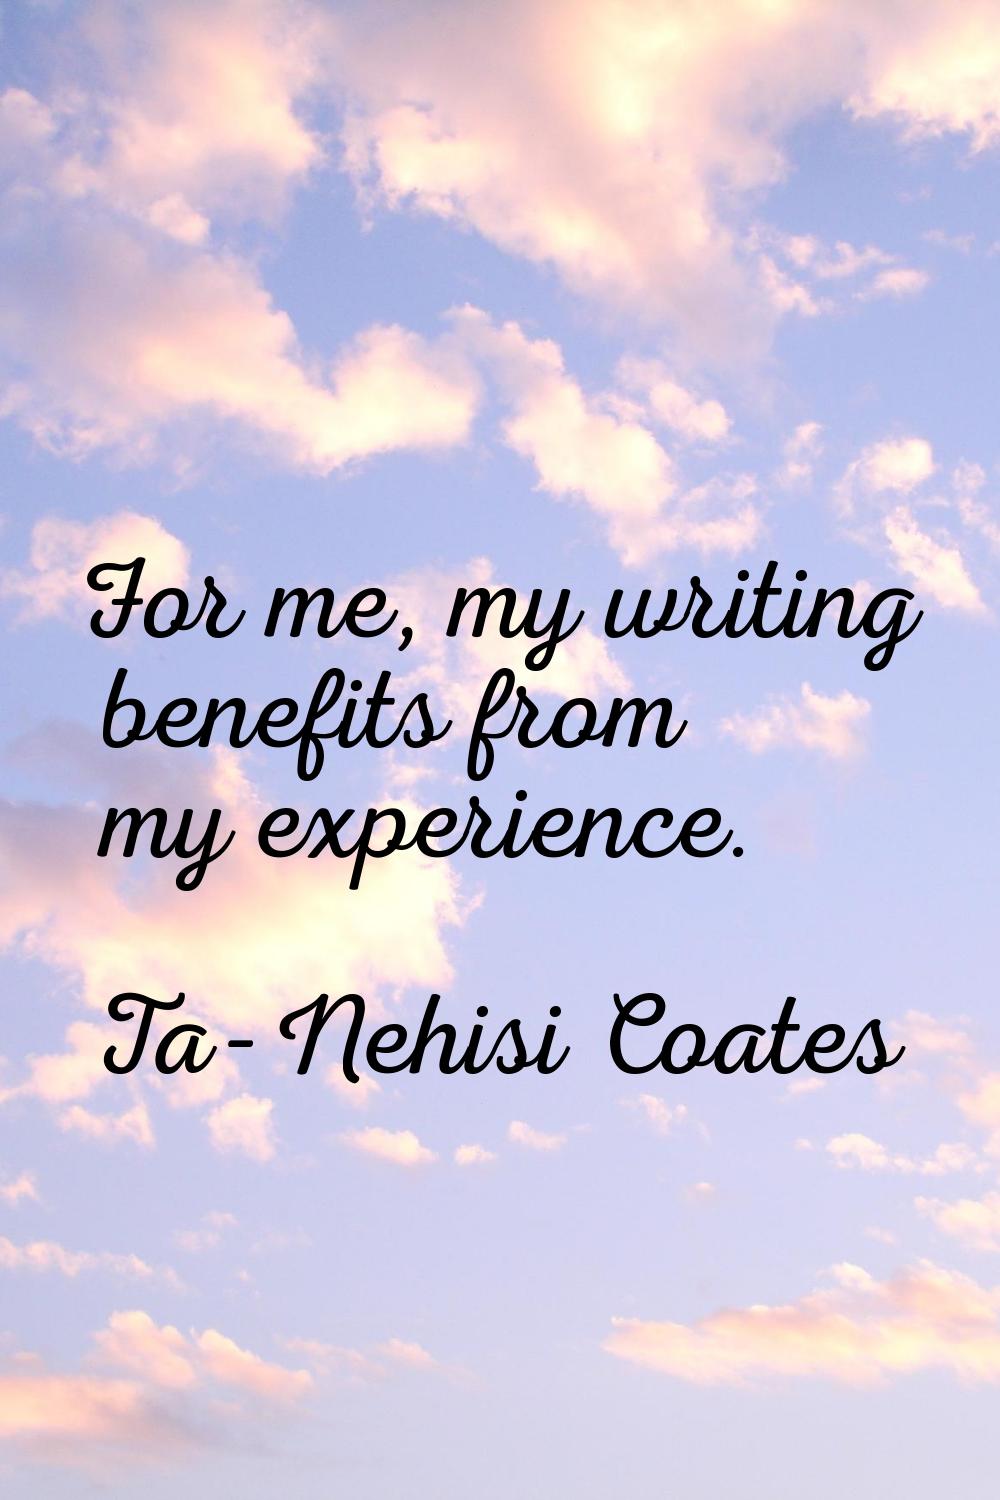 For me, my writing benefits from my experience.